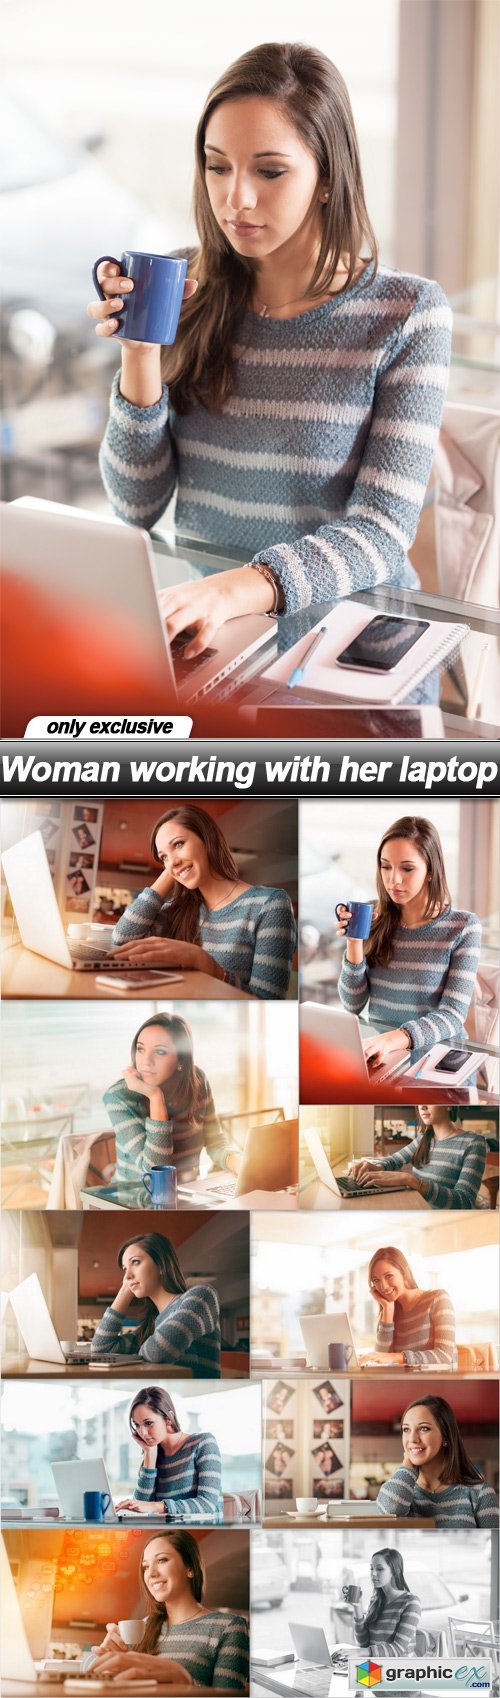 Woman working with her laptop - 10 UHQ JPEG